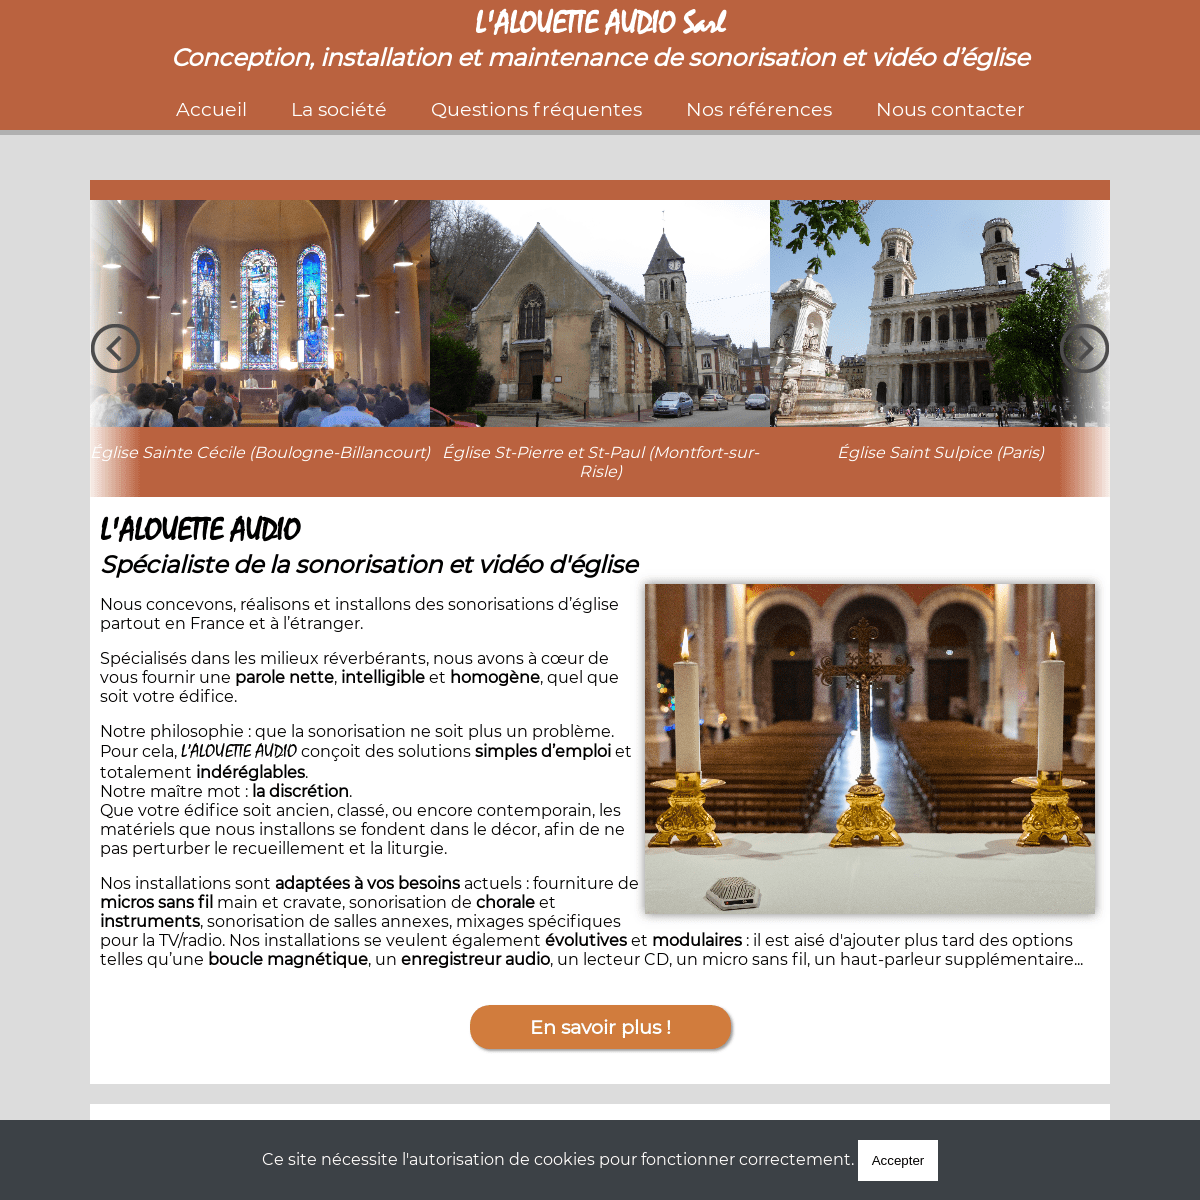 A complete backup of sonorisationdeglise.com